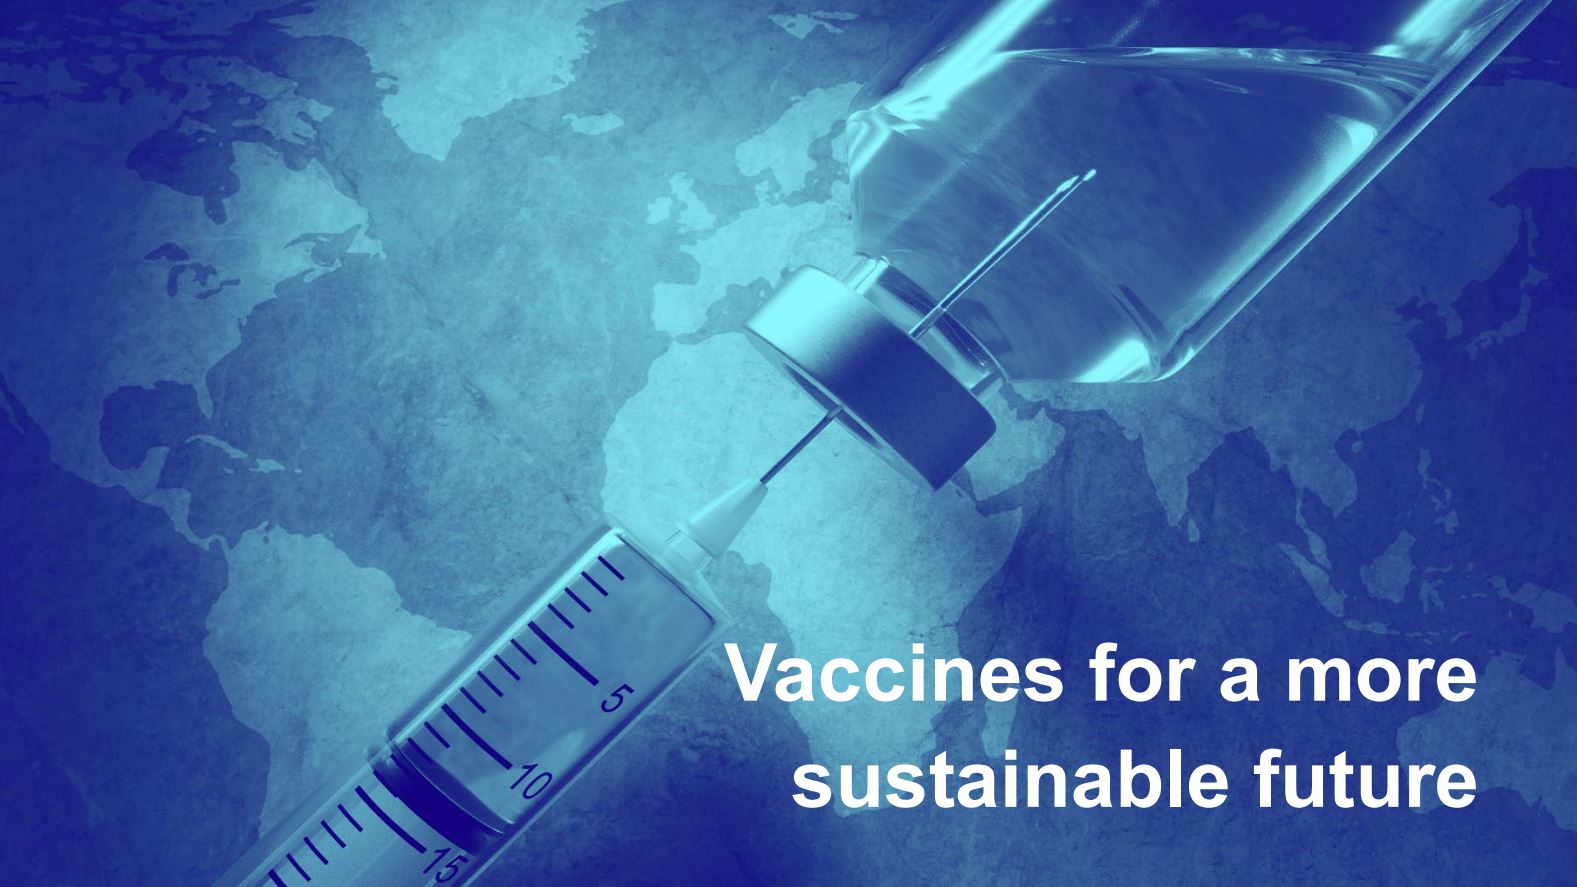 Vaccines for a sustainable future